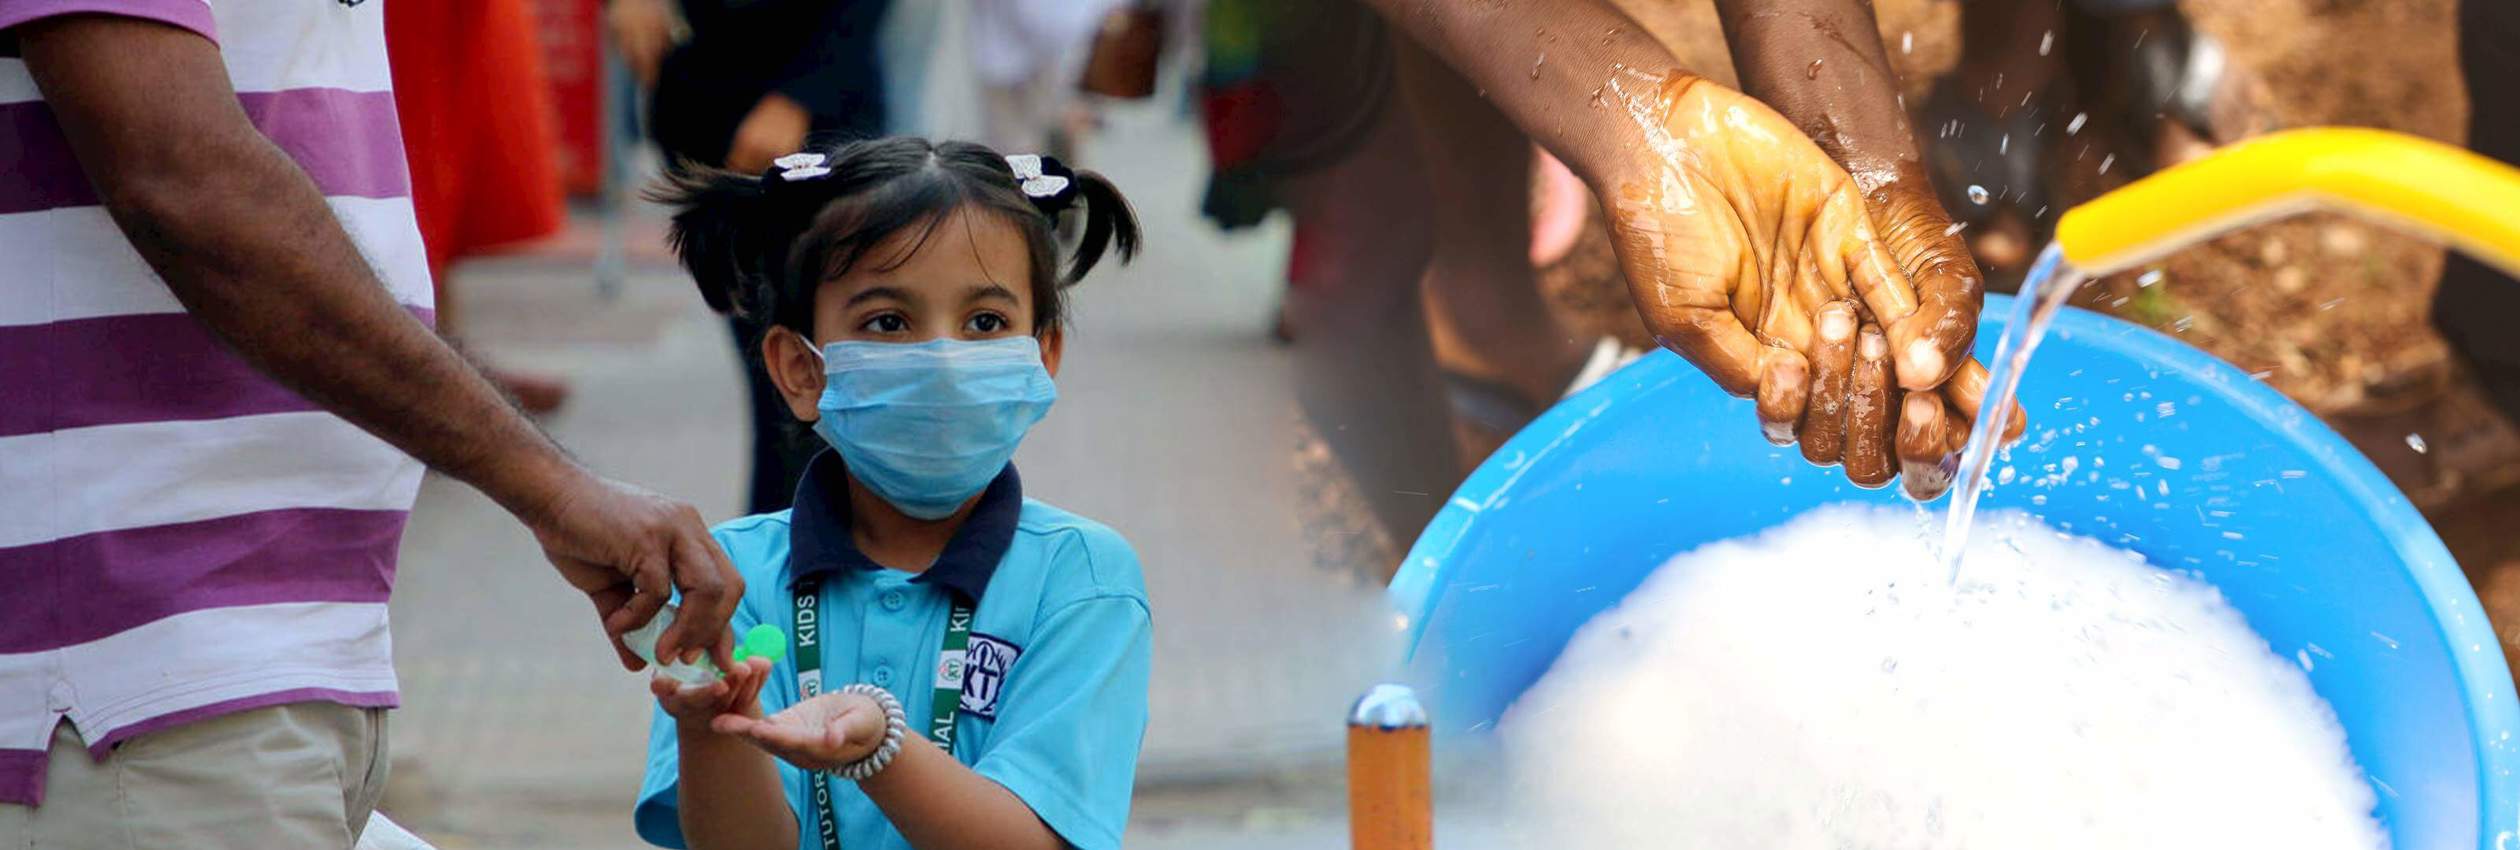 A kid wears a protective mask as a preventive measure against the spread of Coronavirus in Dhaka.